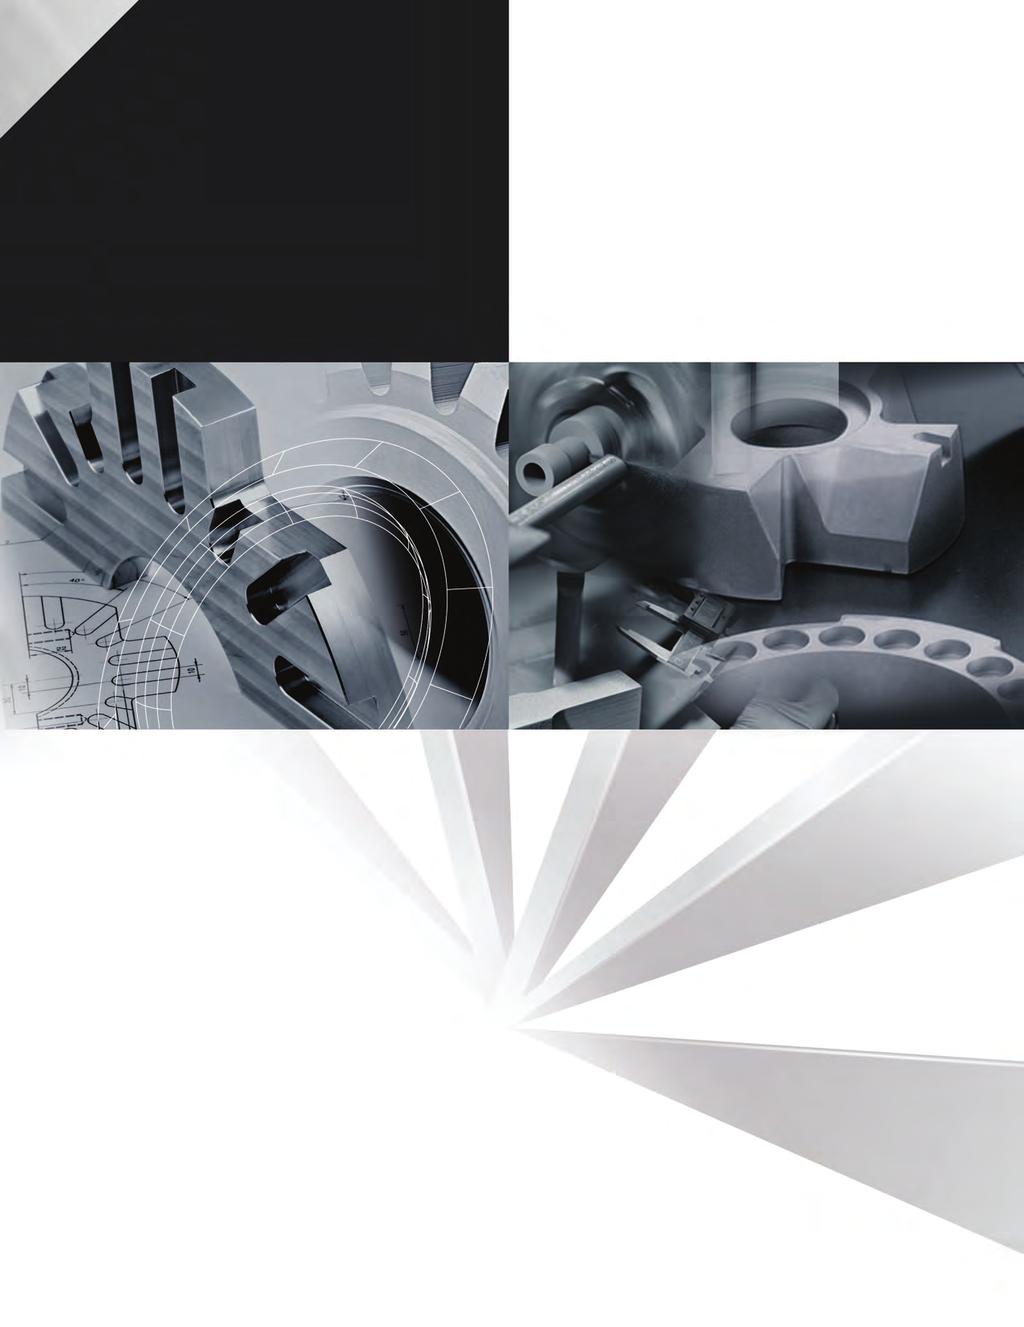 OUR MANUFACTURING CAPABILITIES Extramet has a wide range of manufacturing capabilities and extensive prototype-tooling and production experience in the custom applications of tungsten carbide